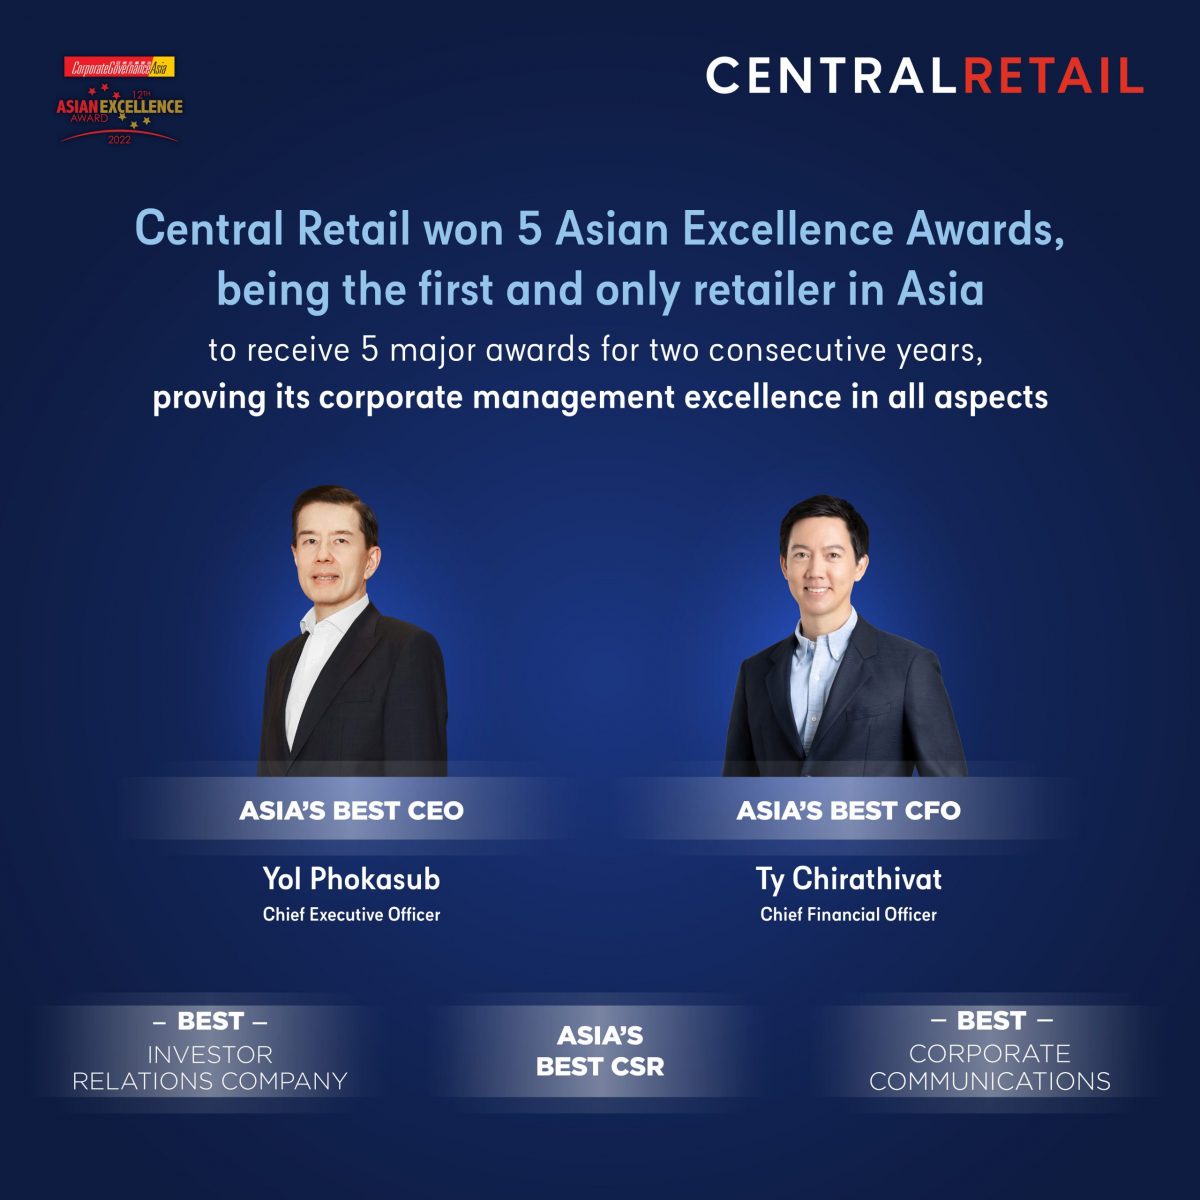 Central Retail, the first and only retailer in Asia, to receive 5 major Asian Excellence Awards 2022 for two consecutive years, proving its corporate management excellence in all